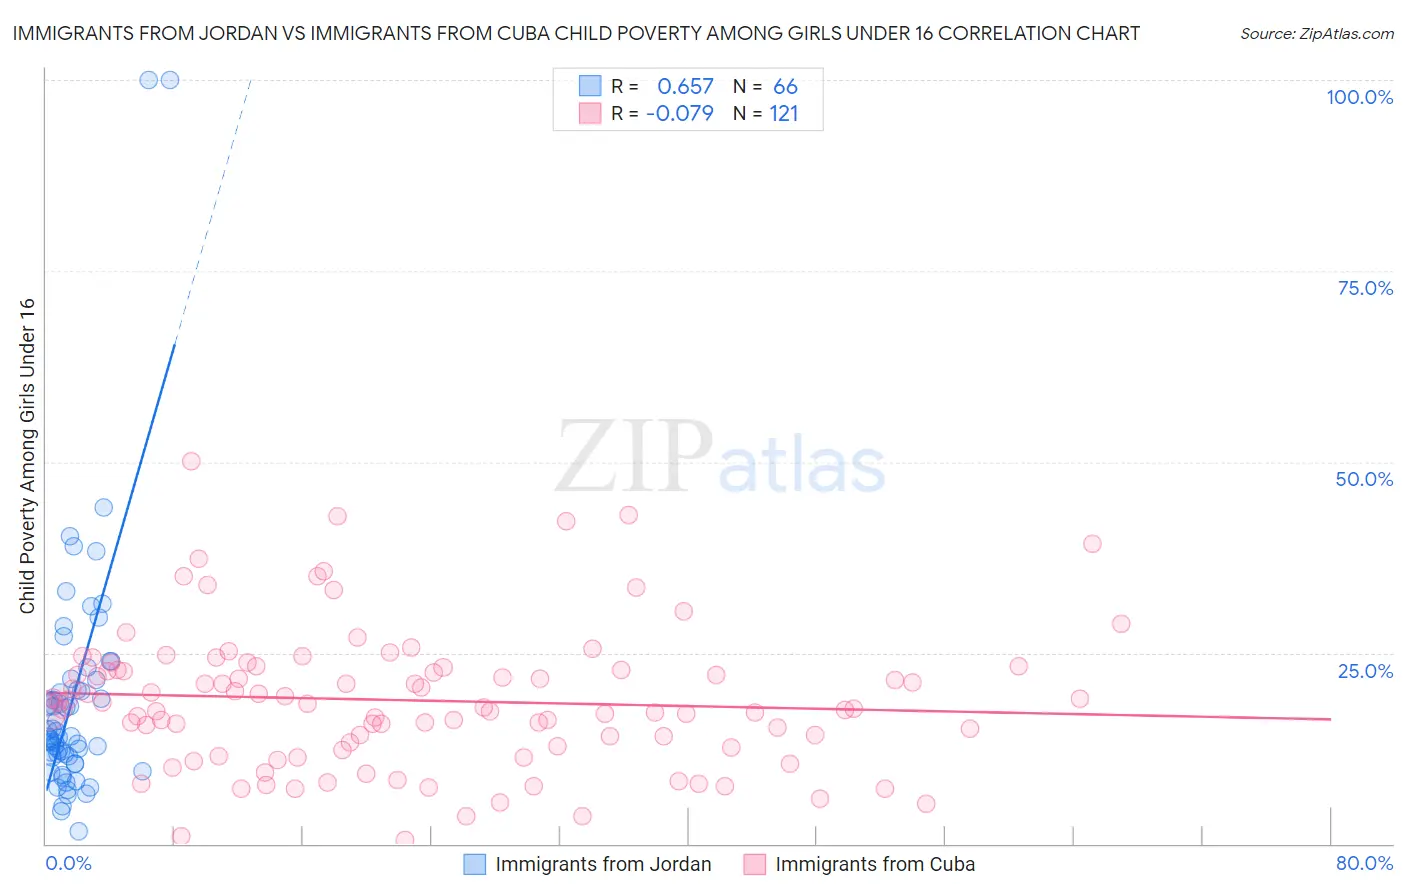 Immigrants from Jordan vs Immigrants from Cuba Child Poverty Among Girls Under 16